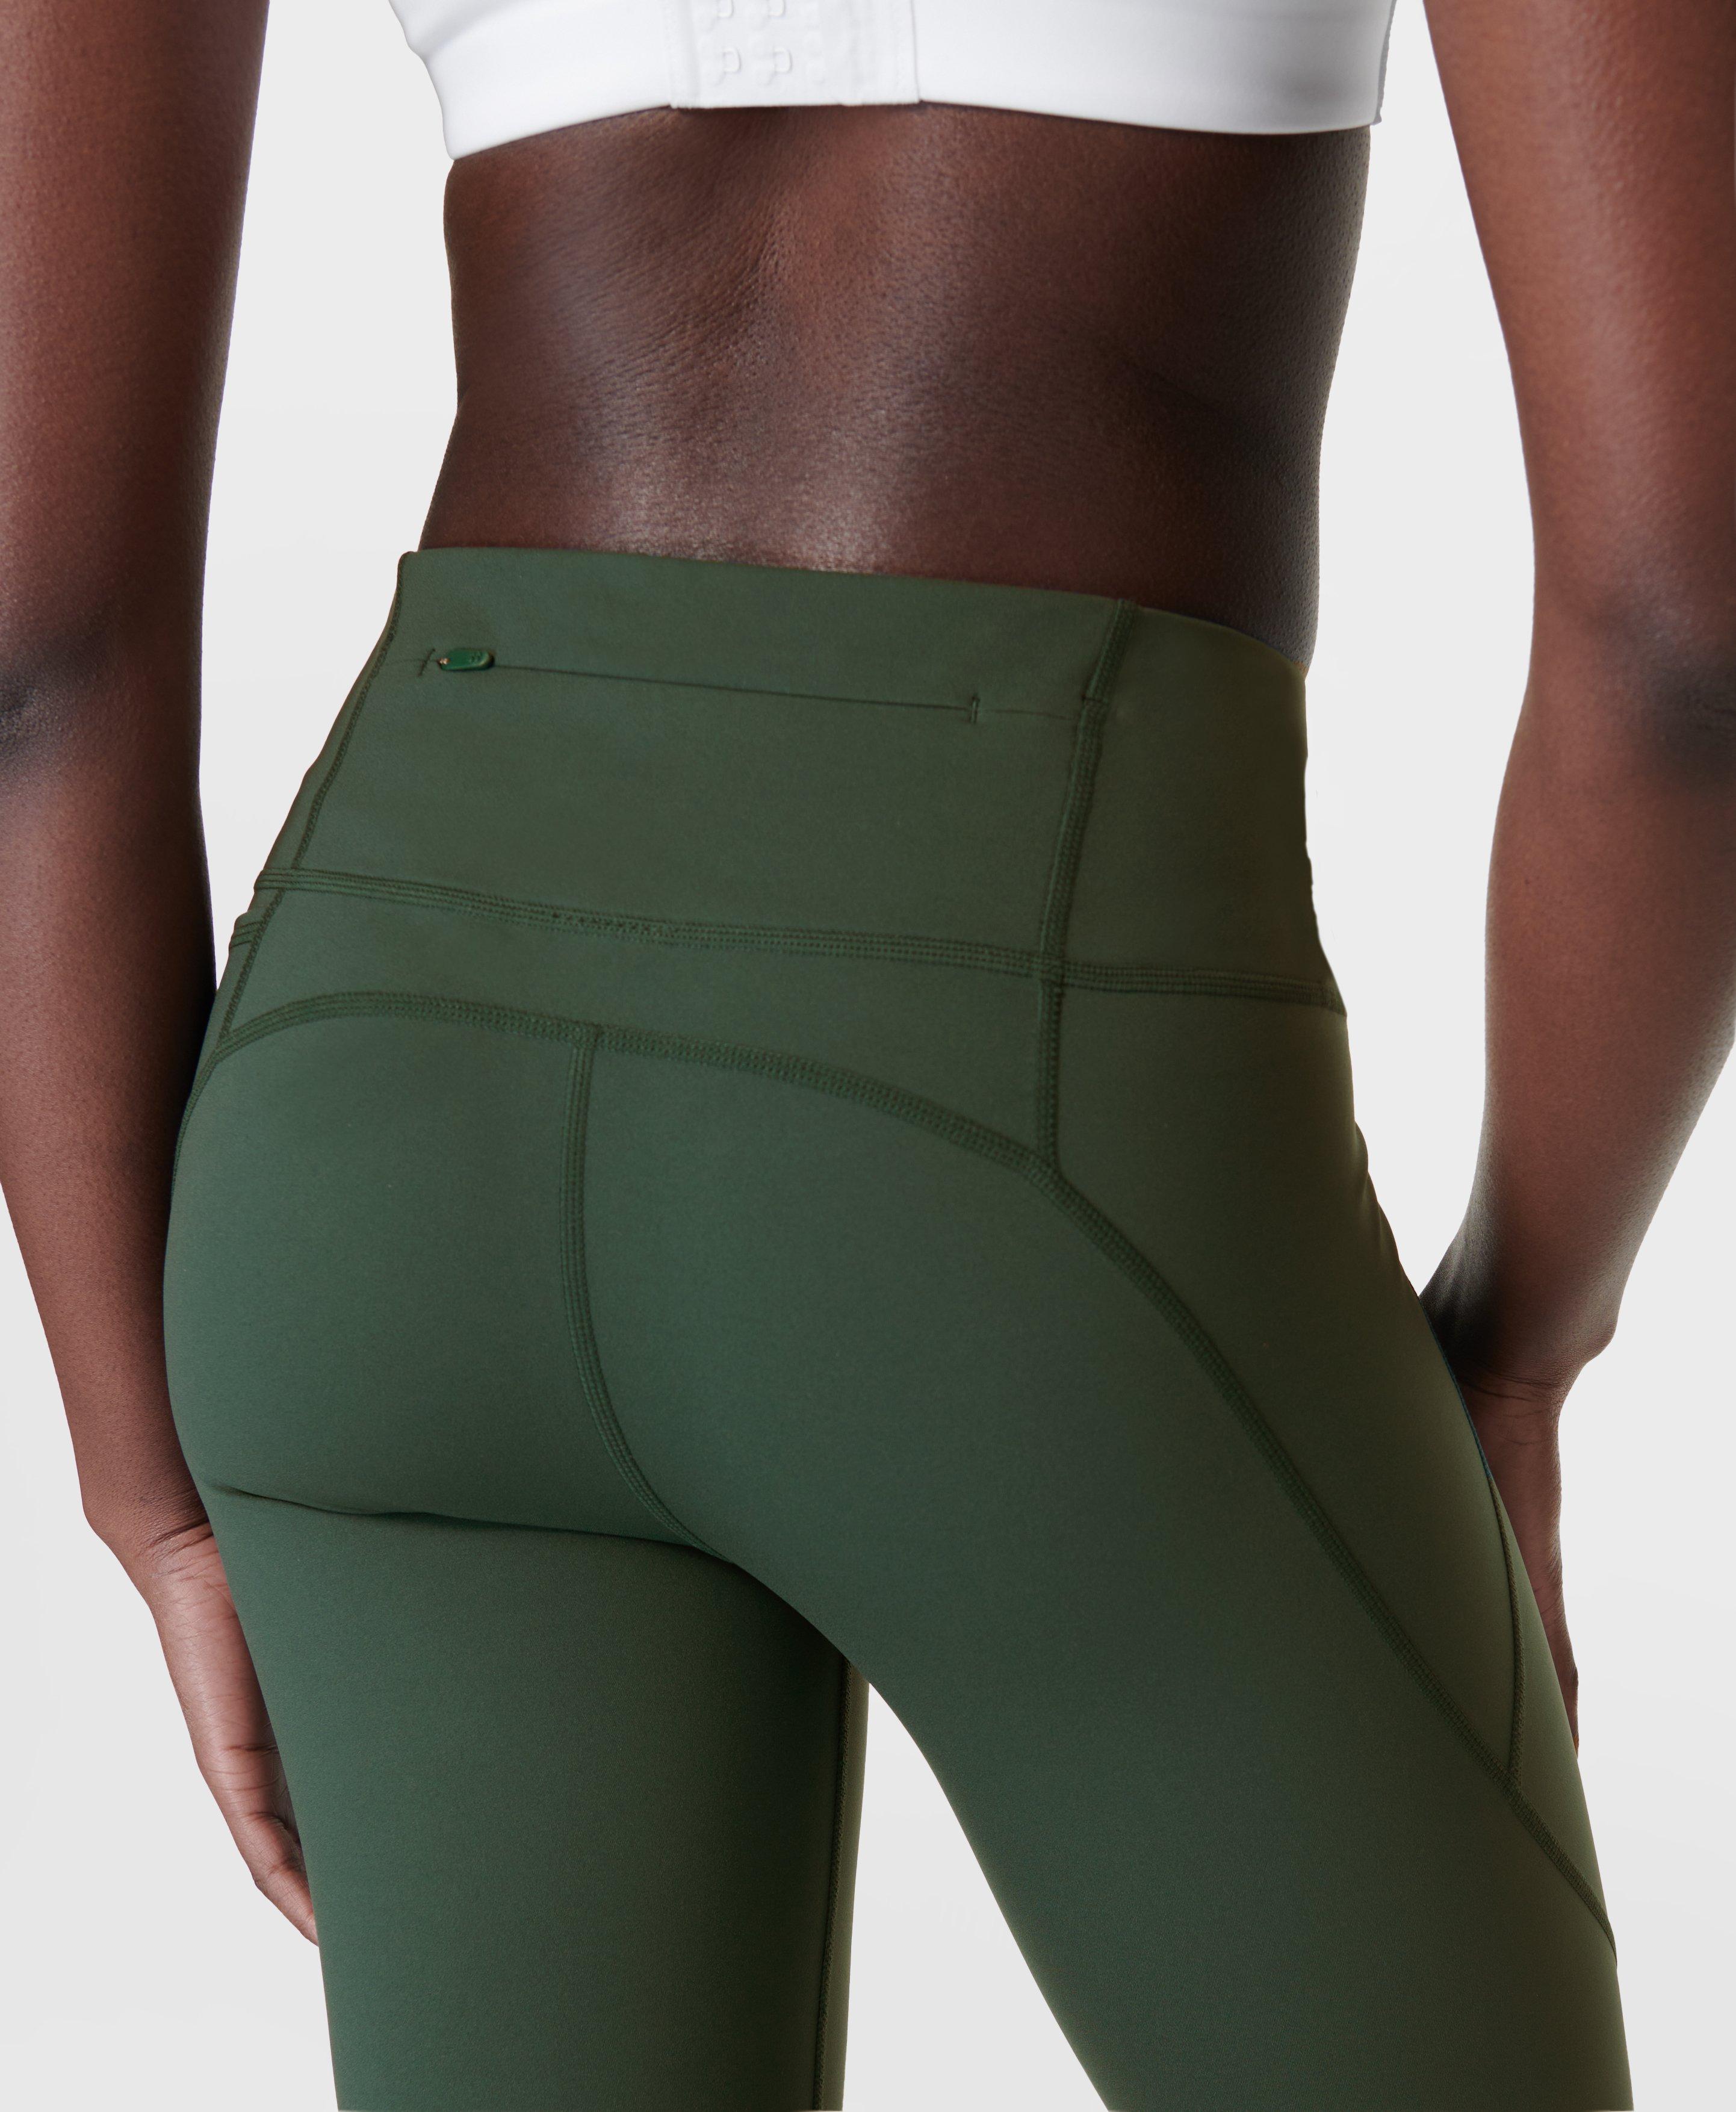 Sweaty Betty All Day Contour Workout Leggings, Green Hibiscus